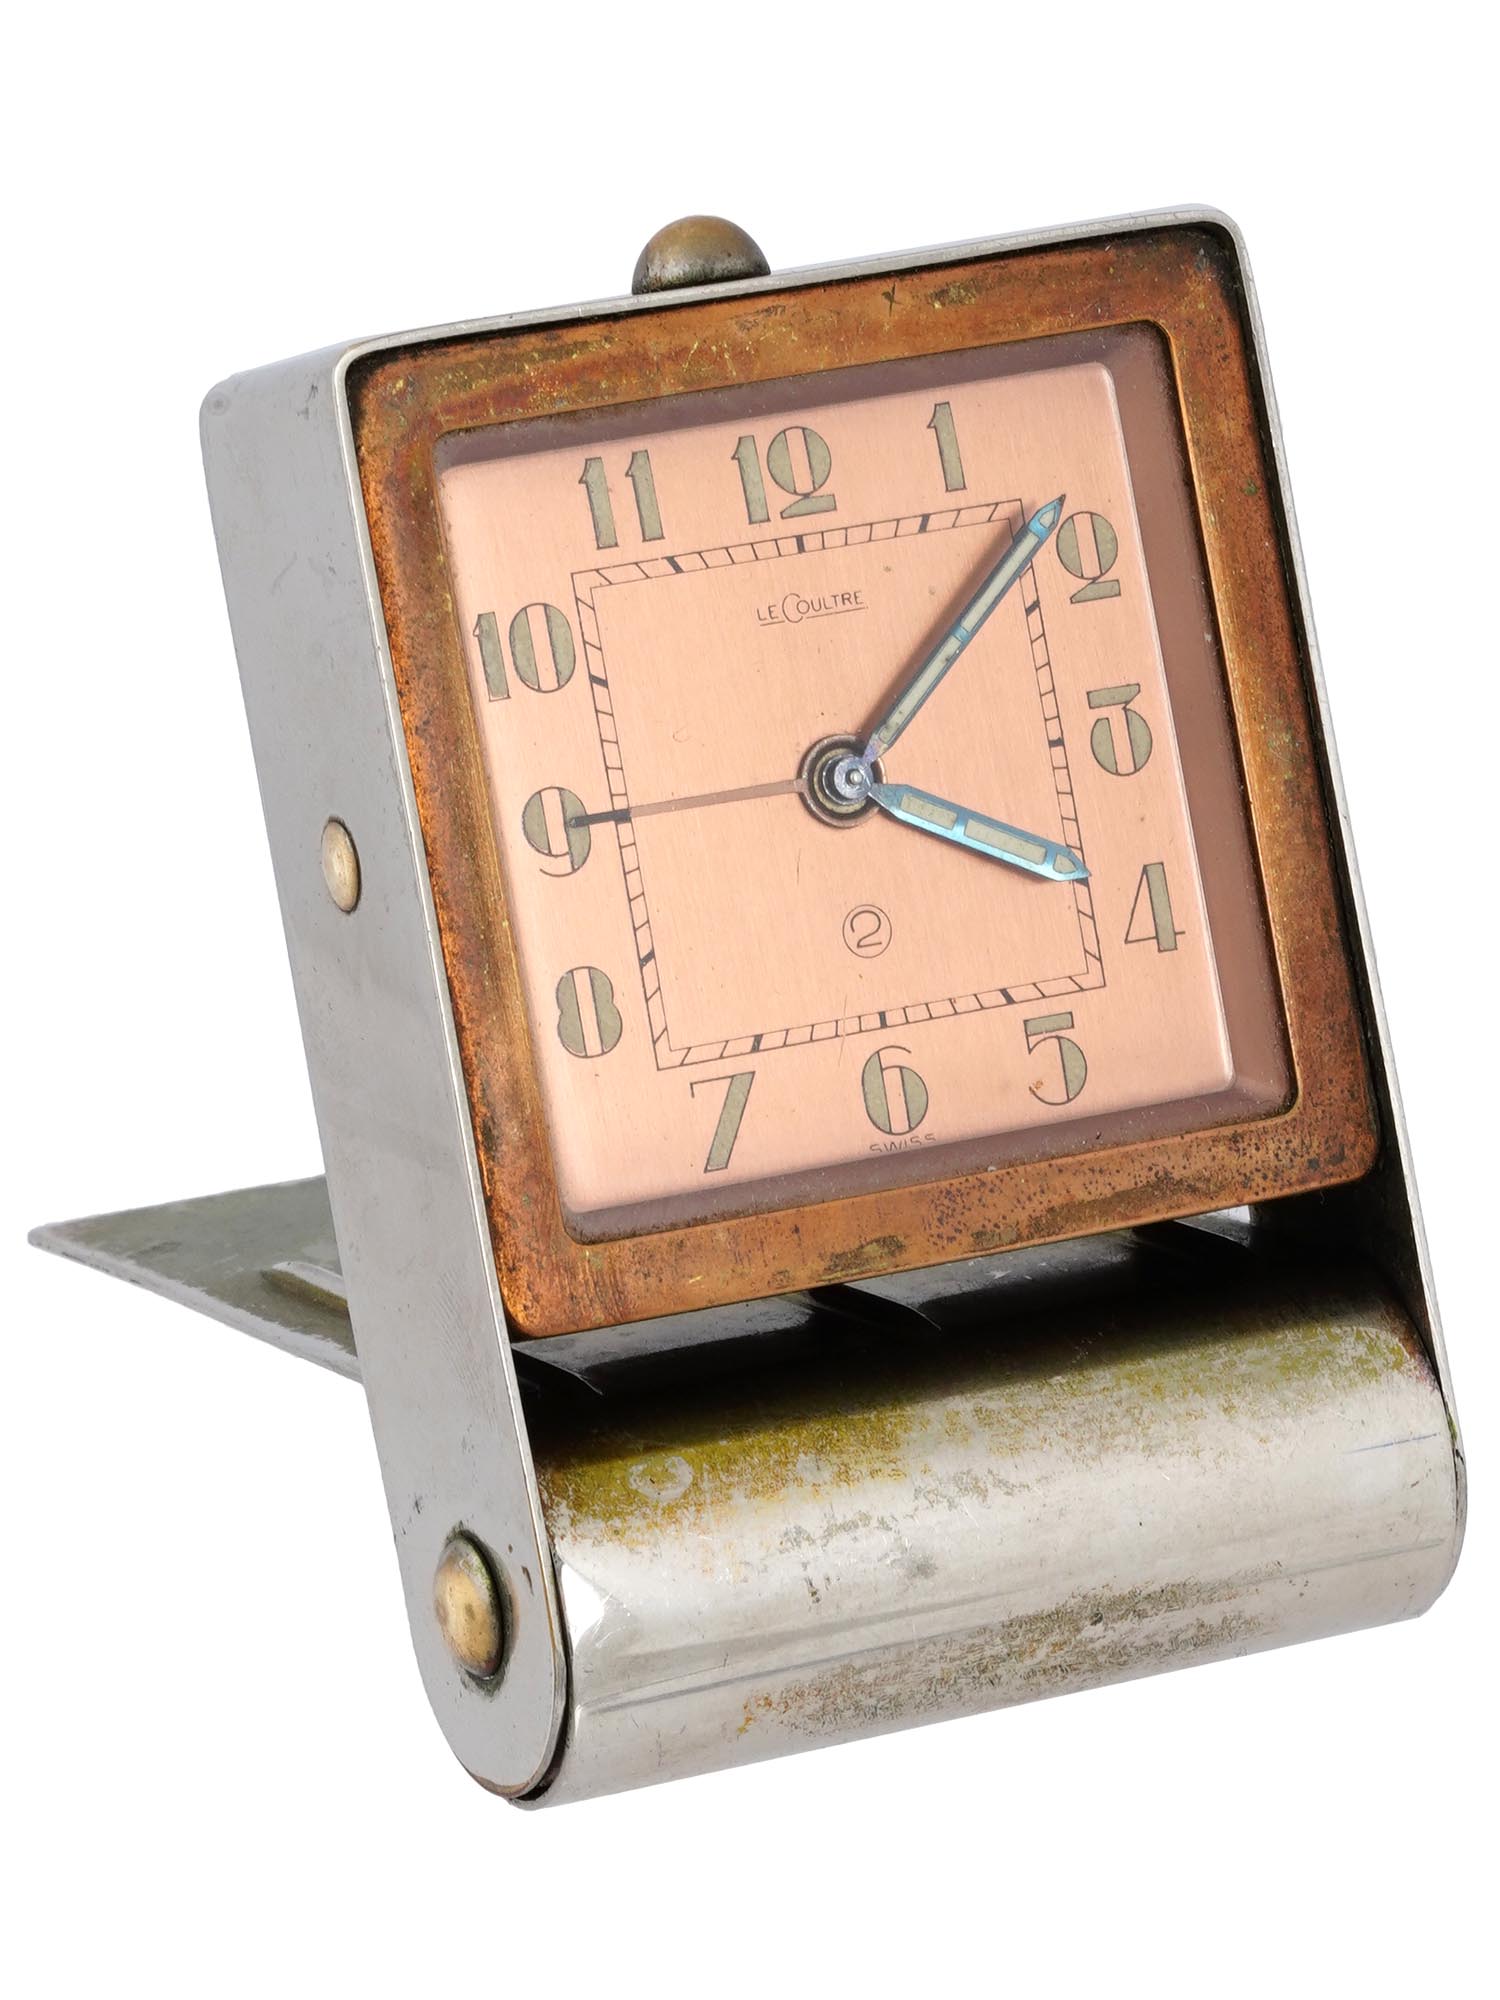 ART DECO JAEGER LE COULTRE TWO DAY TRAVEL CLOCK PIC-0